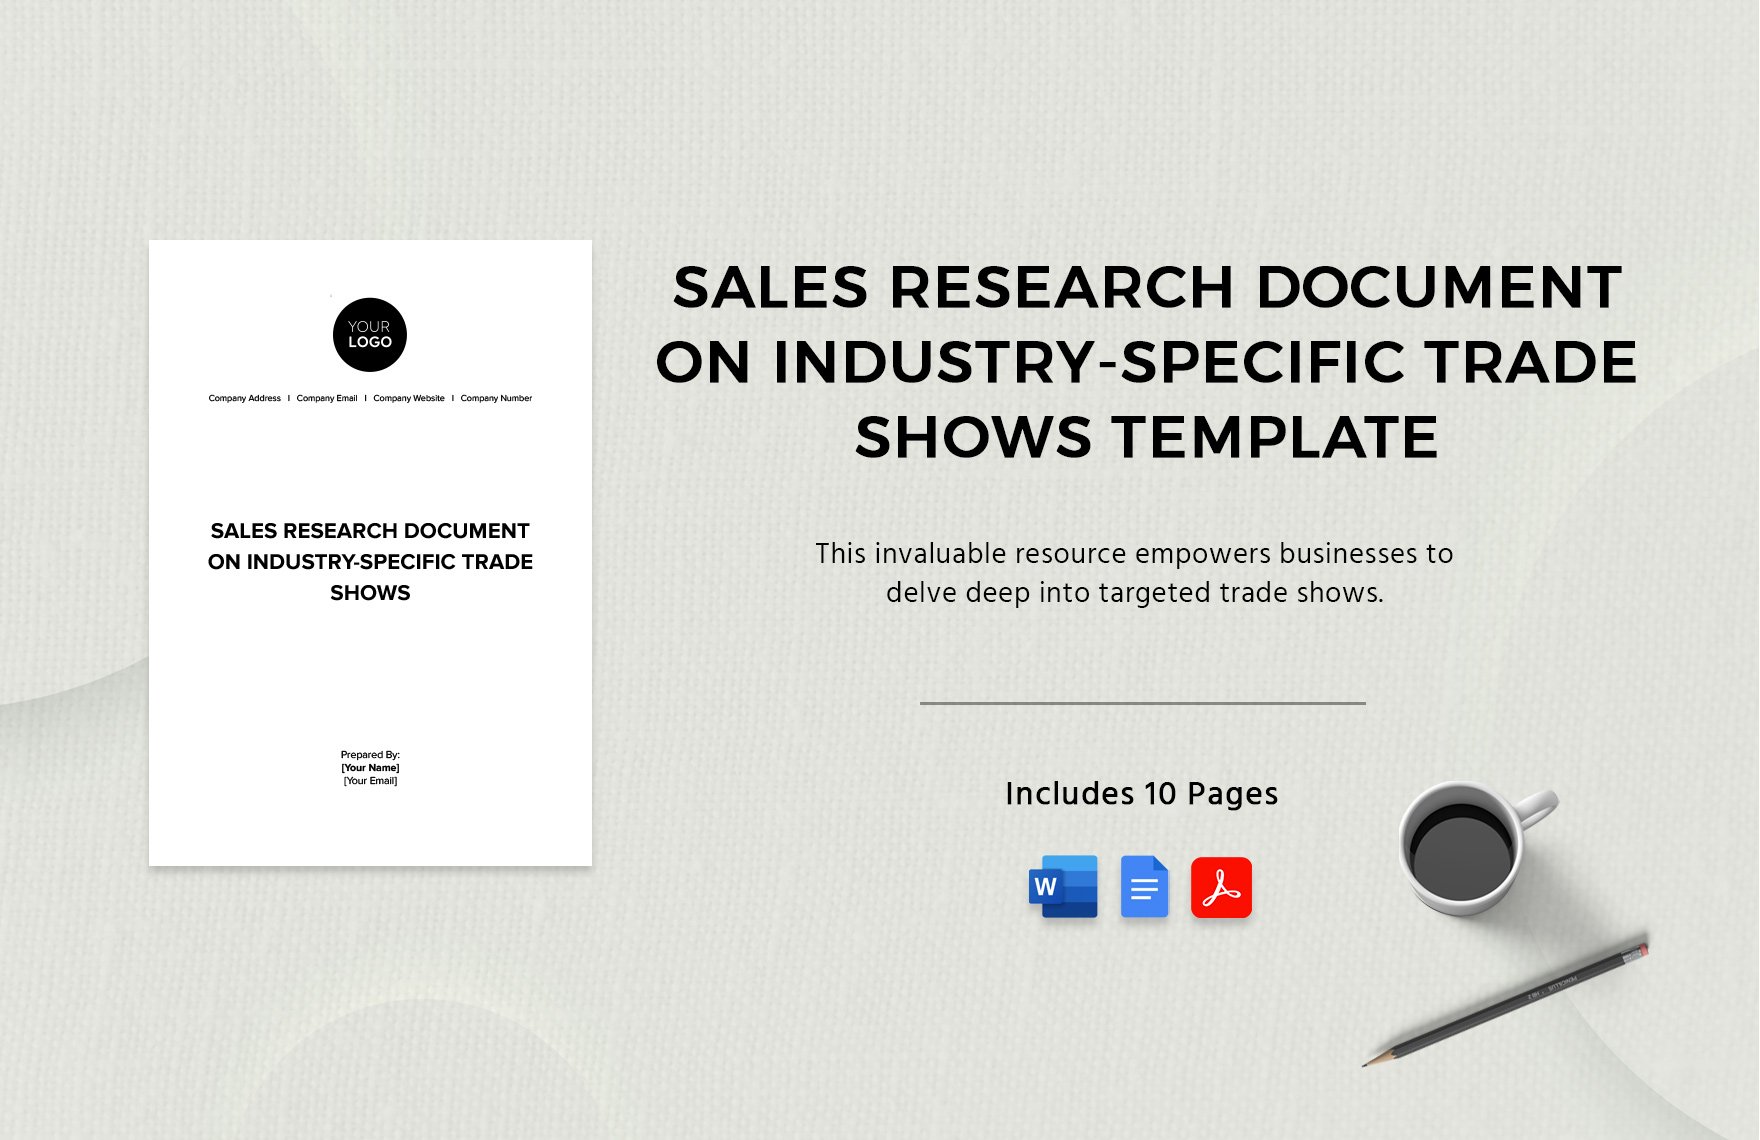 Sales Research Document on Industry-Specific Trade Shows Template